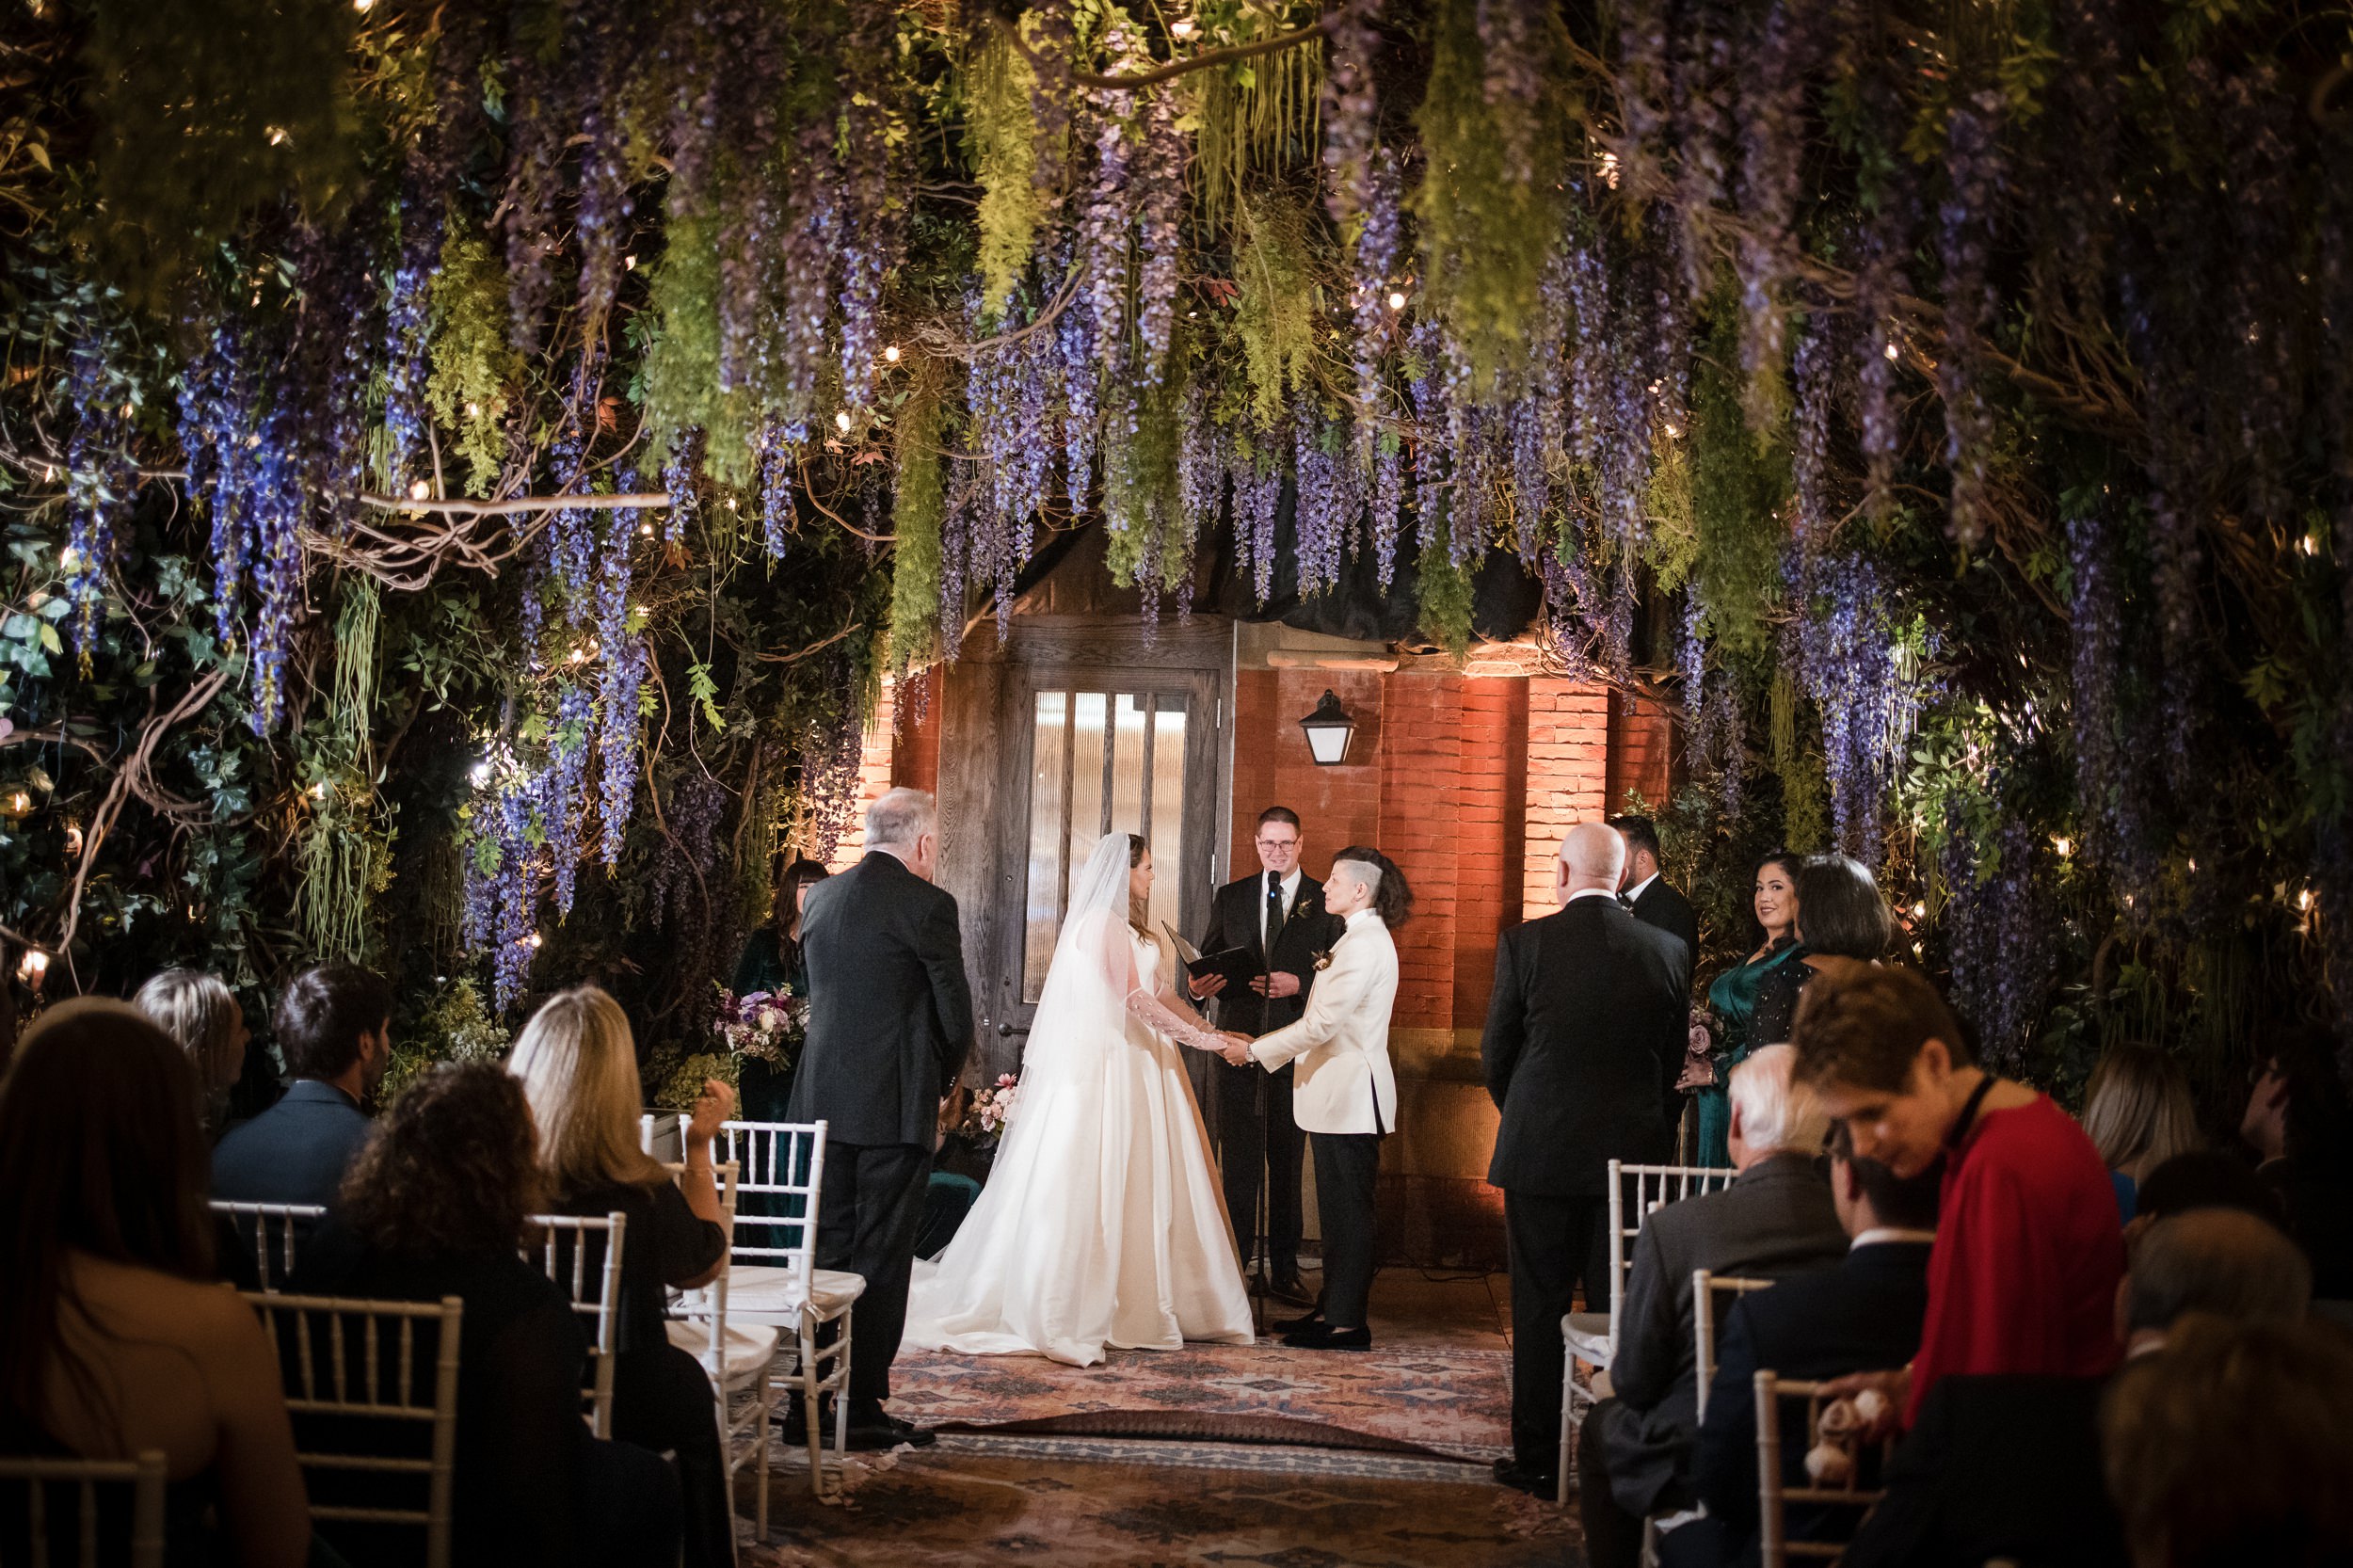 Wedding ceremony in the wisteria garden at a Beekman Hotel wedding in NYC